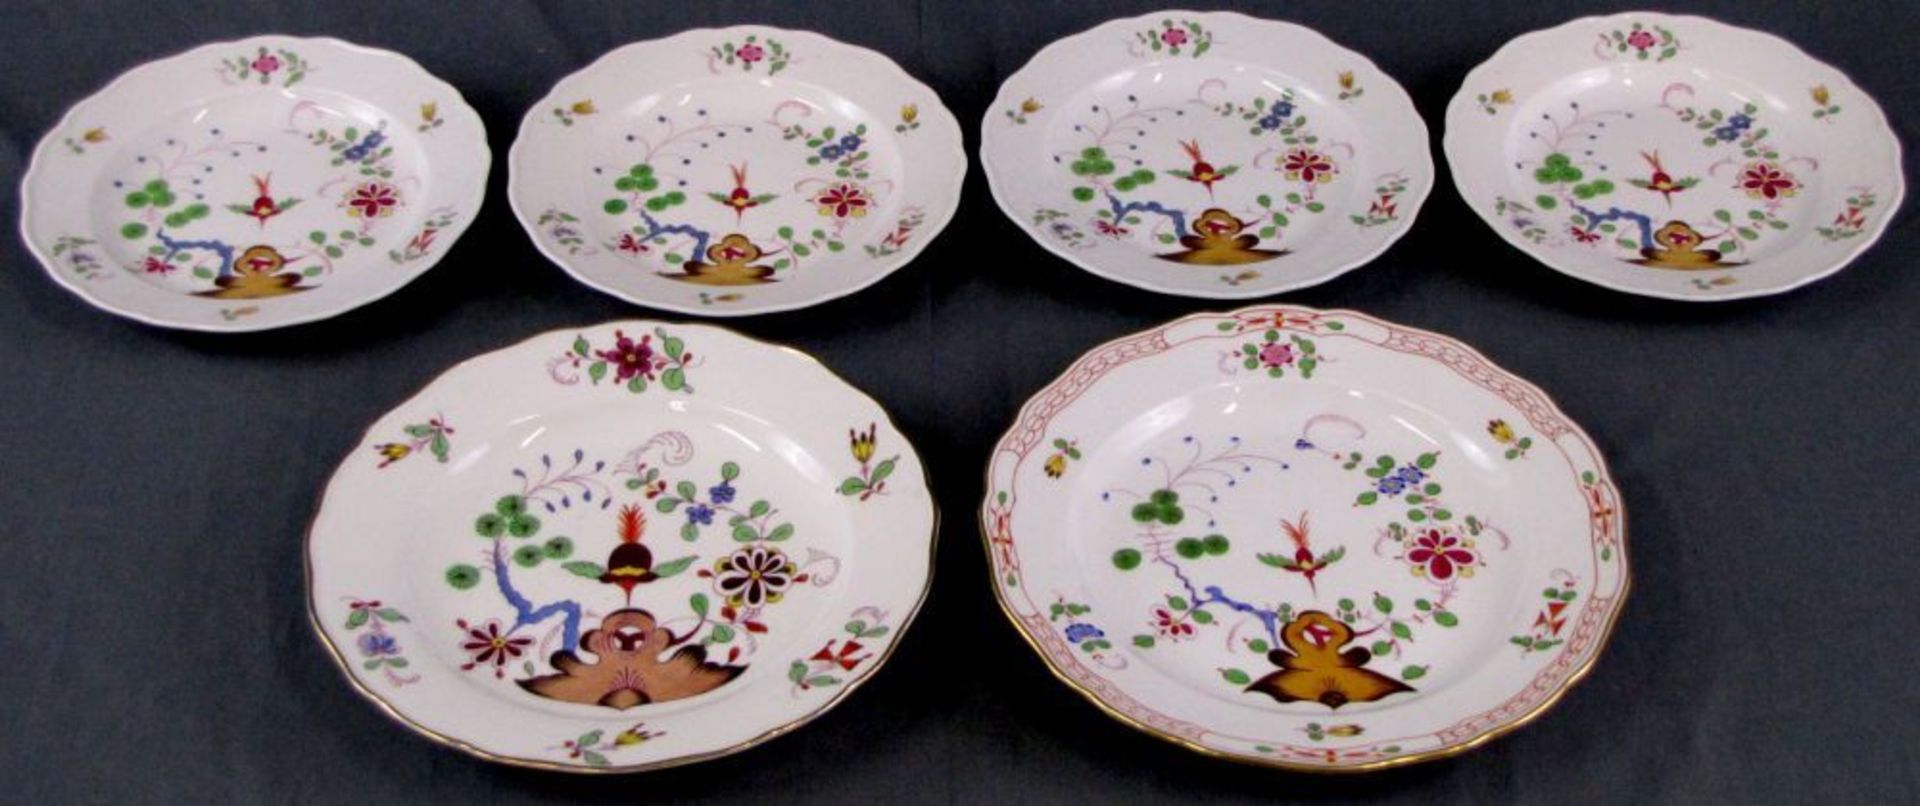 6 Plates Meissen. Knauf-Time. Exotic Decor.  Up to 26.5 cm in diameter. In used condition. 5